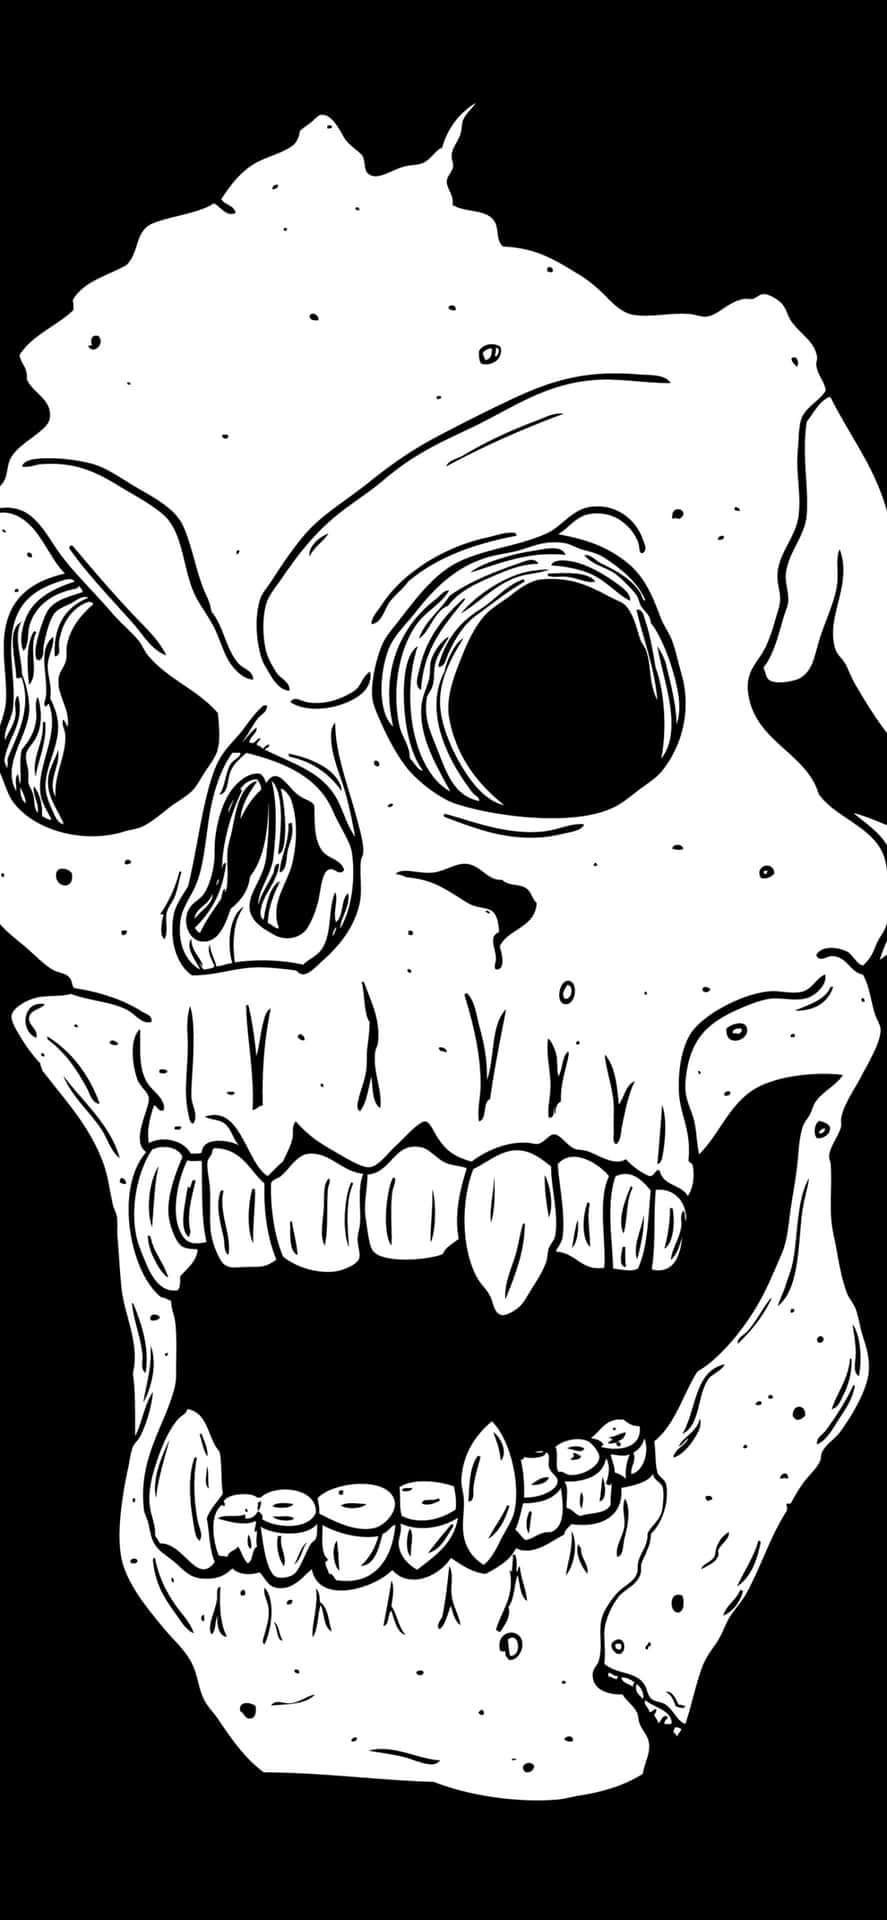 Get the conversation going with Skull Phone Wallpaper